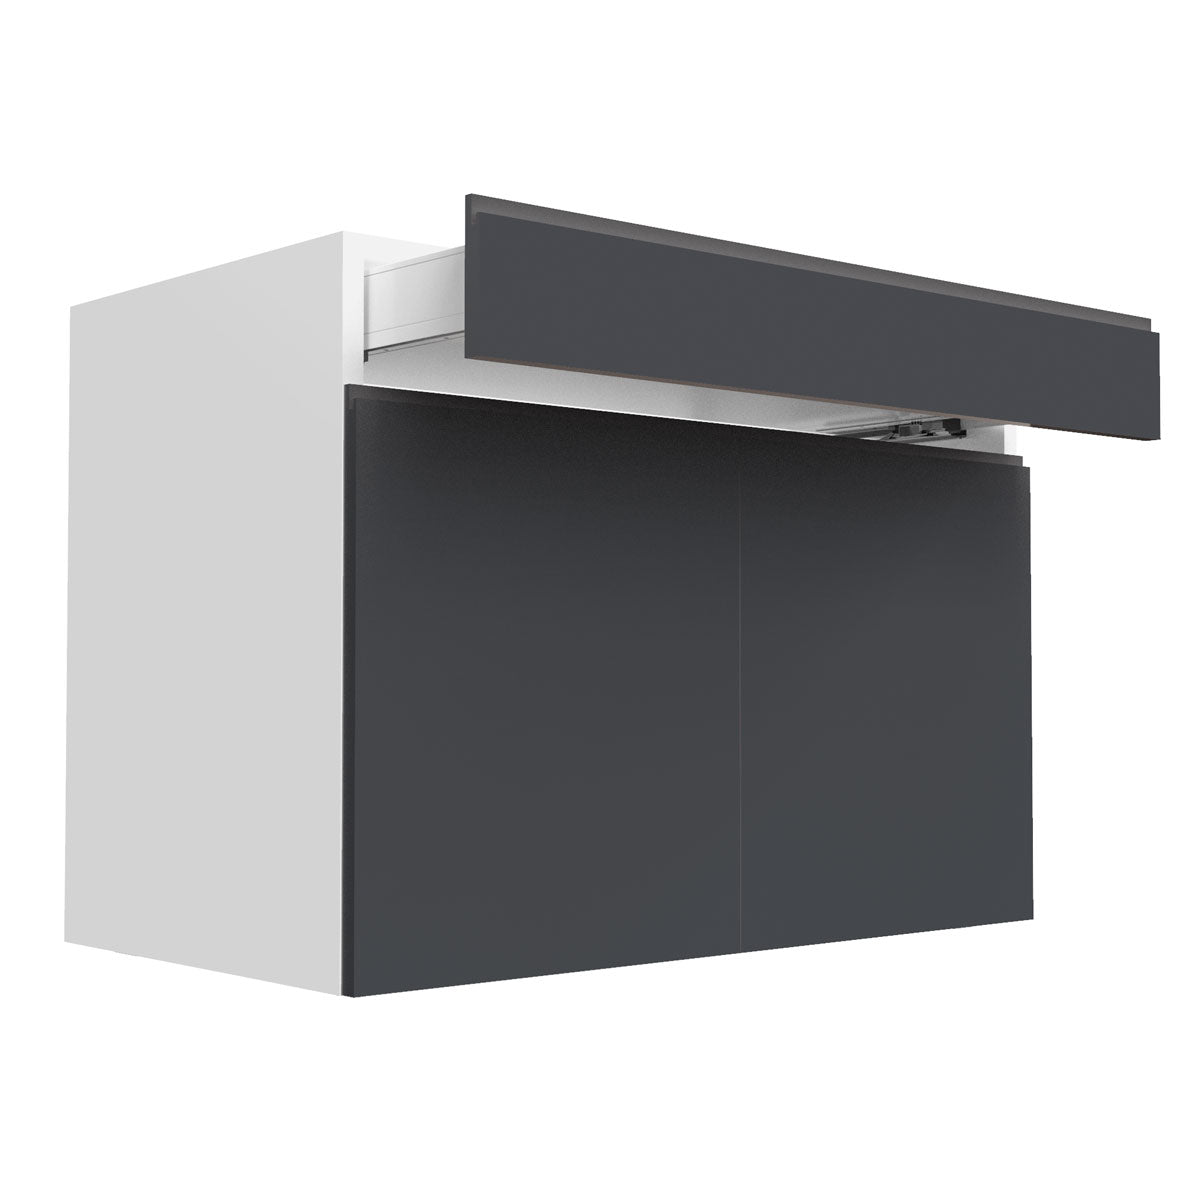 RTA - Lacquer Grey - Double Door Base Cabinets | 42"W x 30"H x 23.8"D